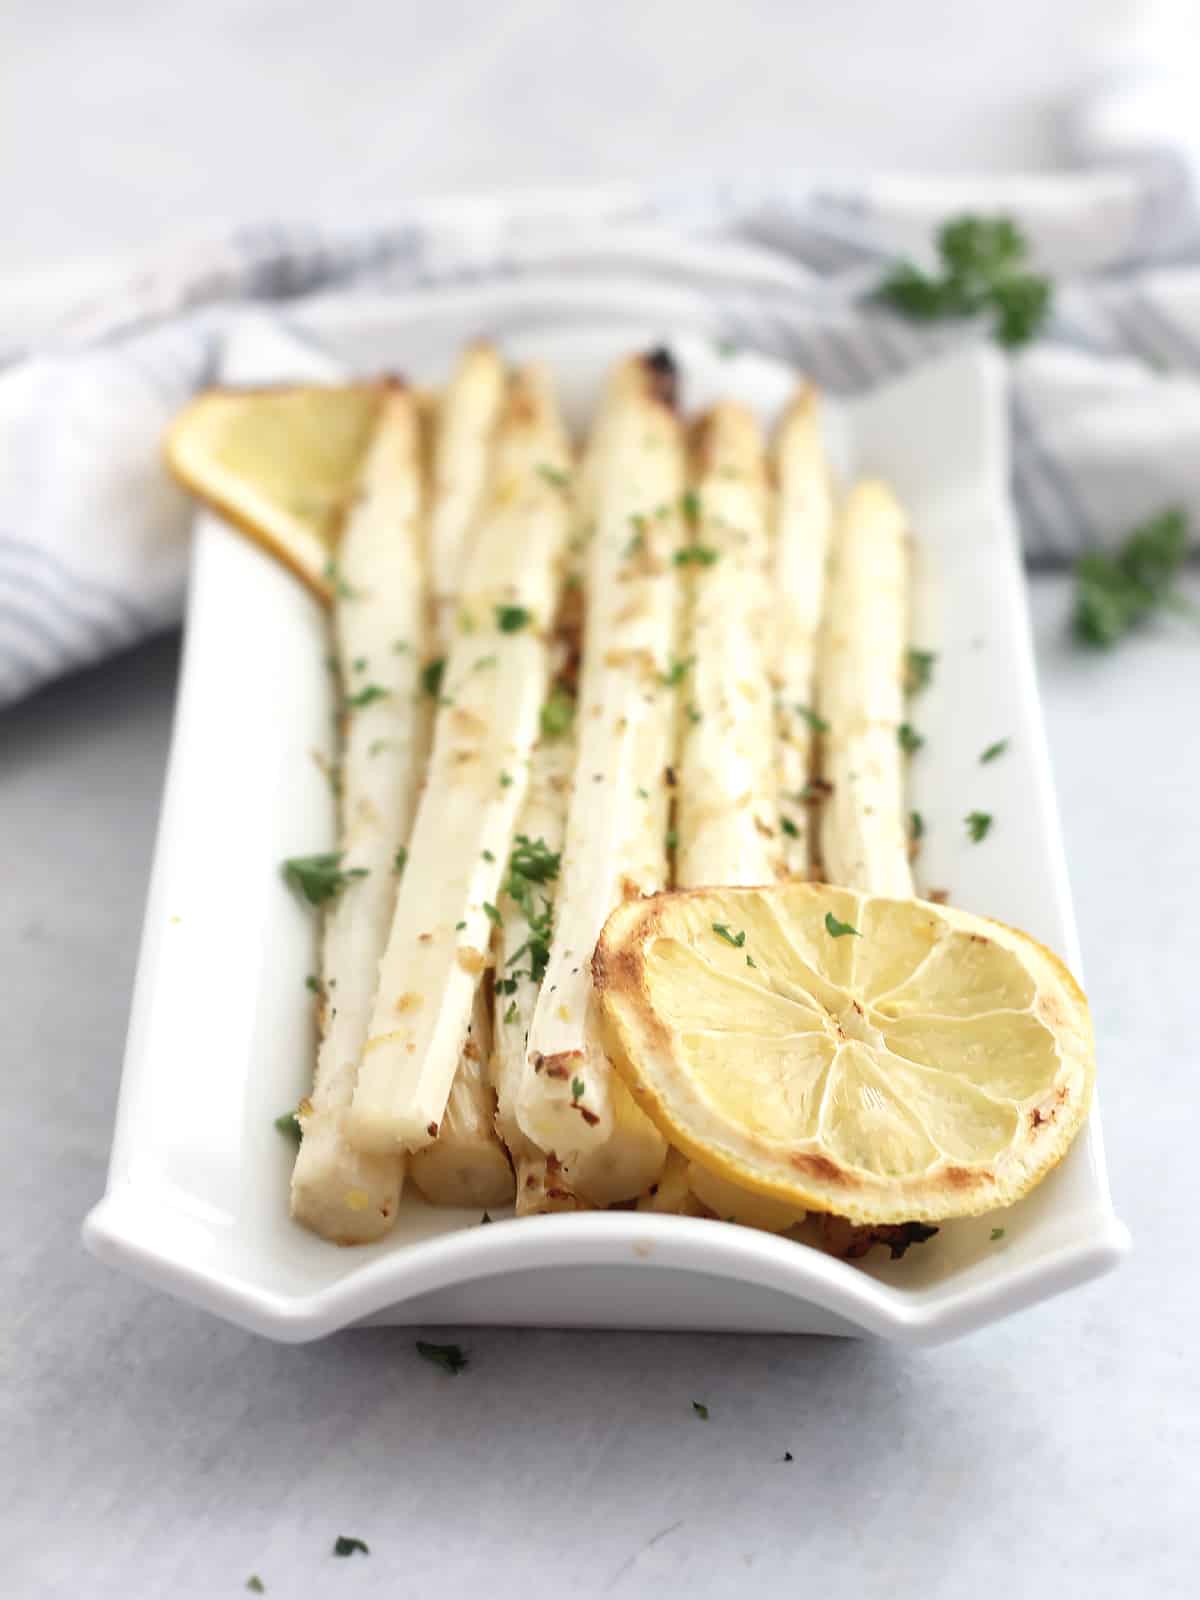 Roasted lemon and white asparagus on a plate.